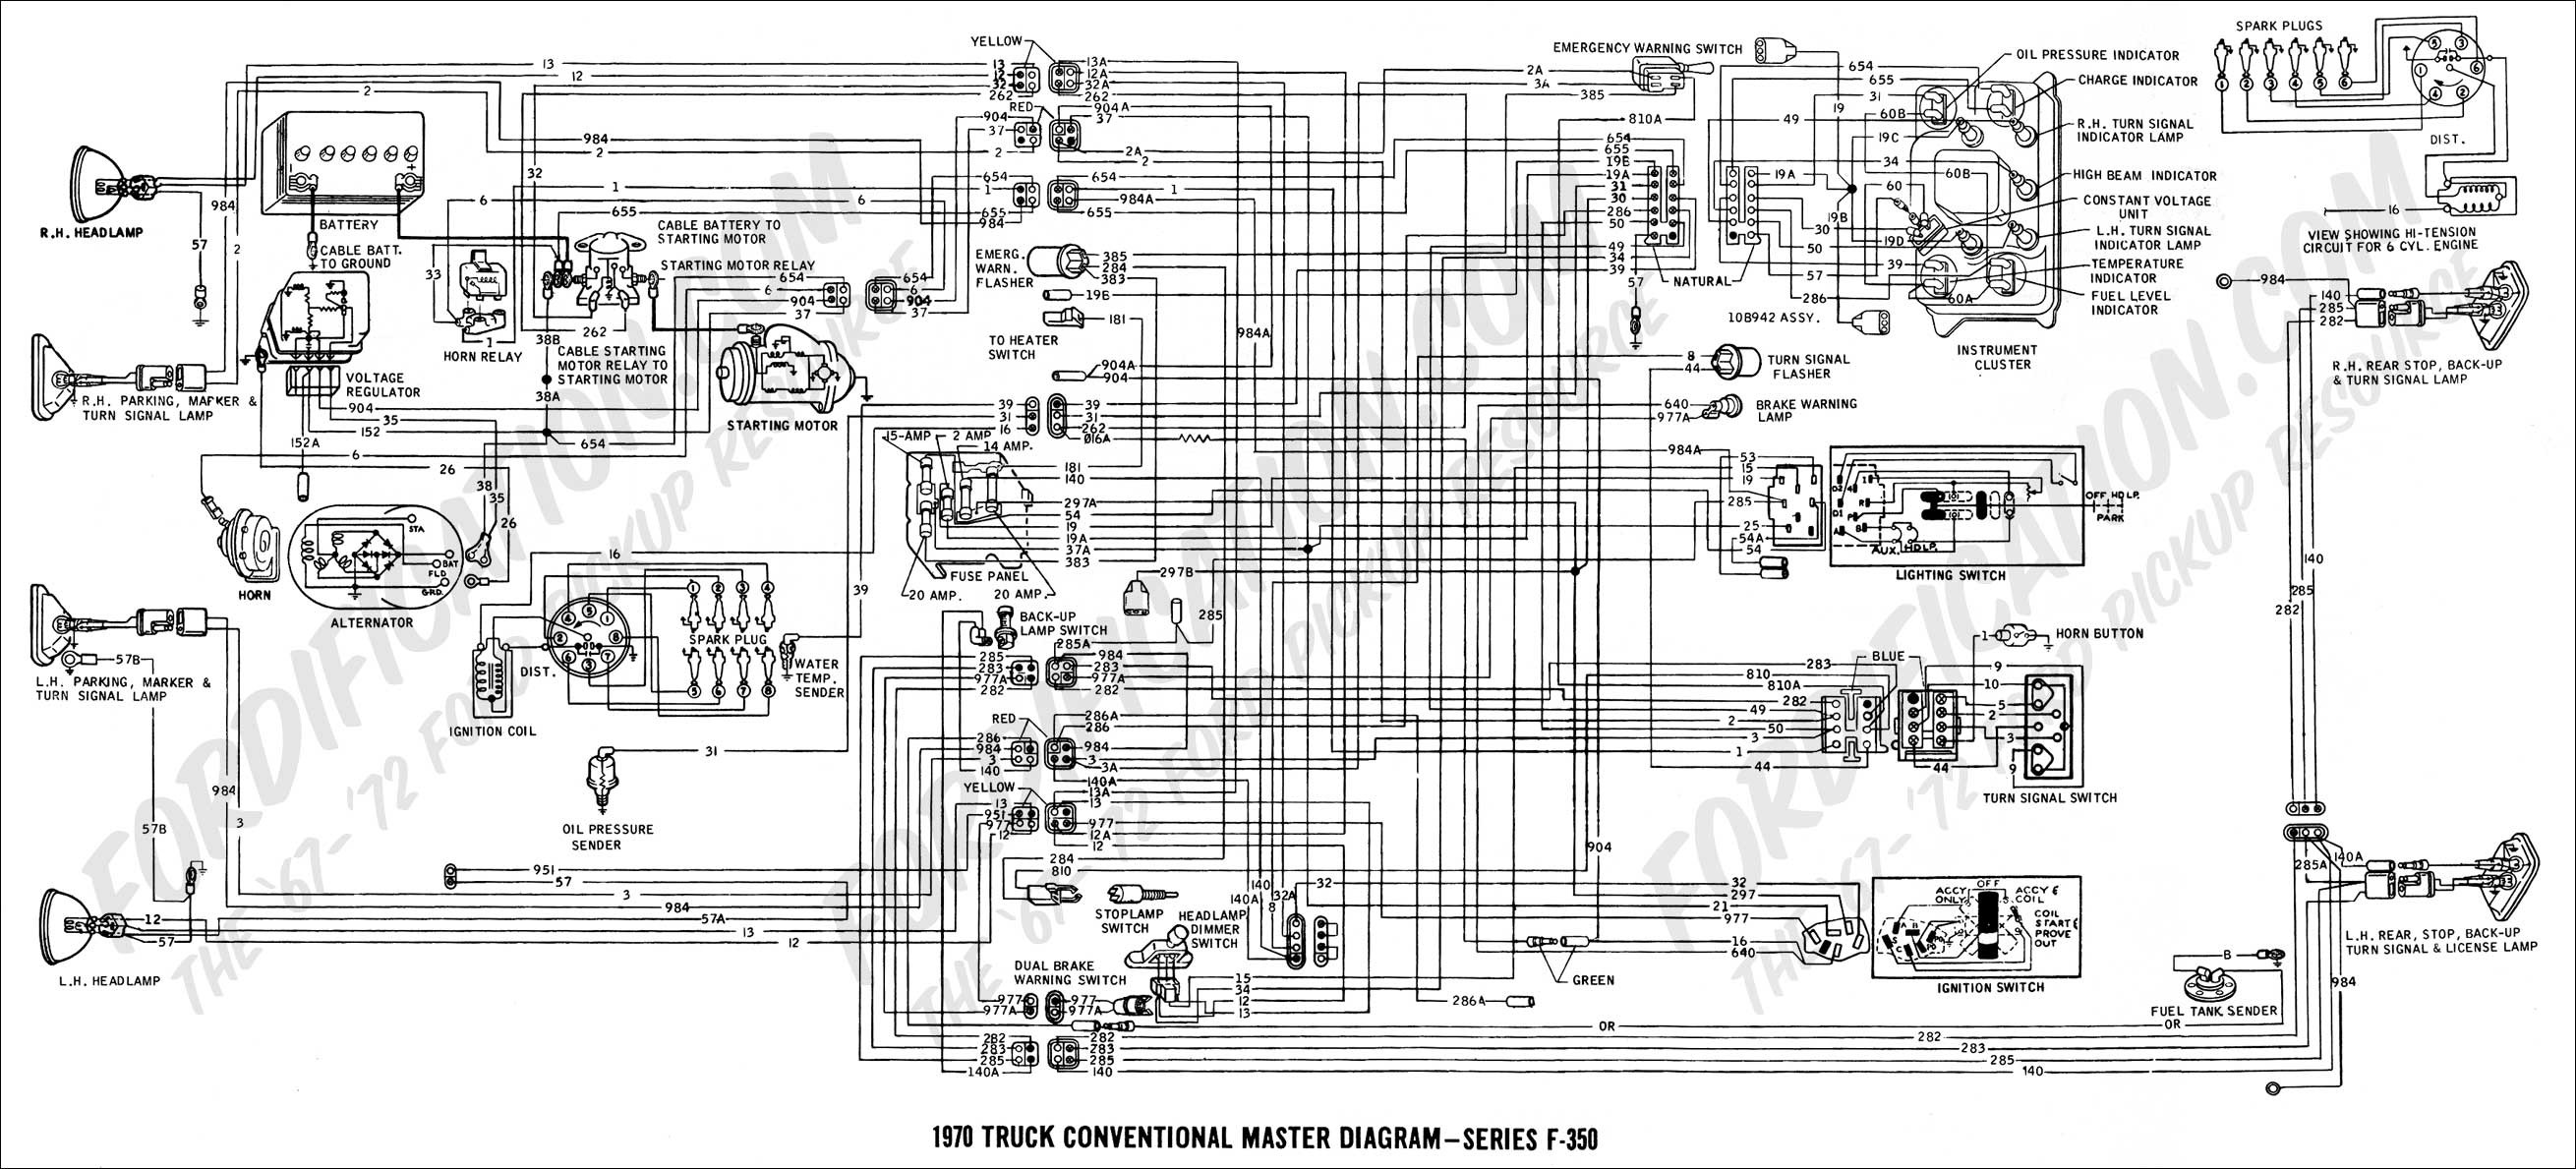 2000 Mustang Engine Diagram 1988 ford Mustang Gt Ignition Wiring Diagram Wwtfkrk 2007